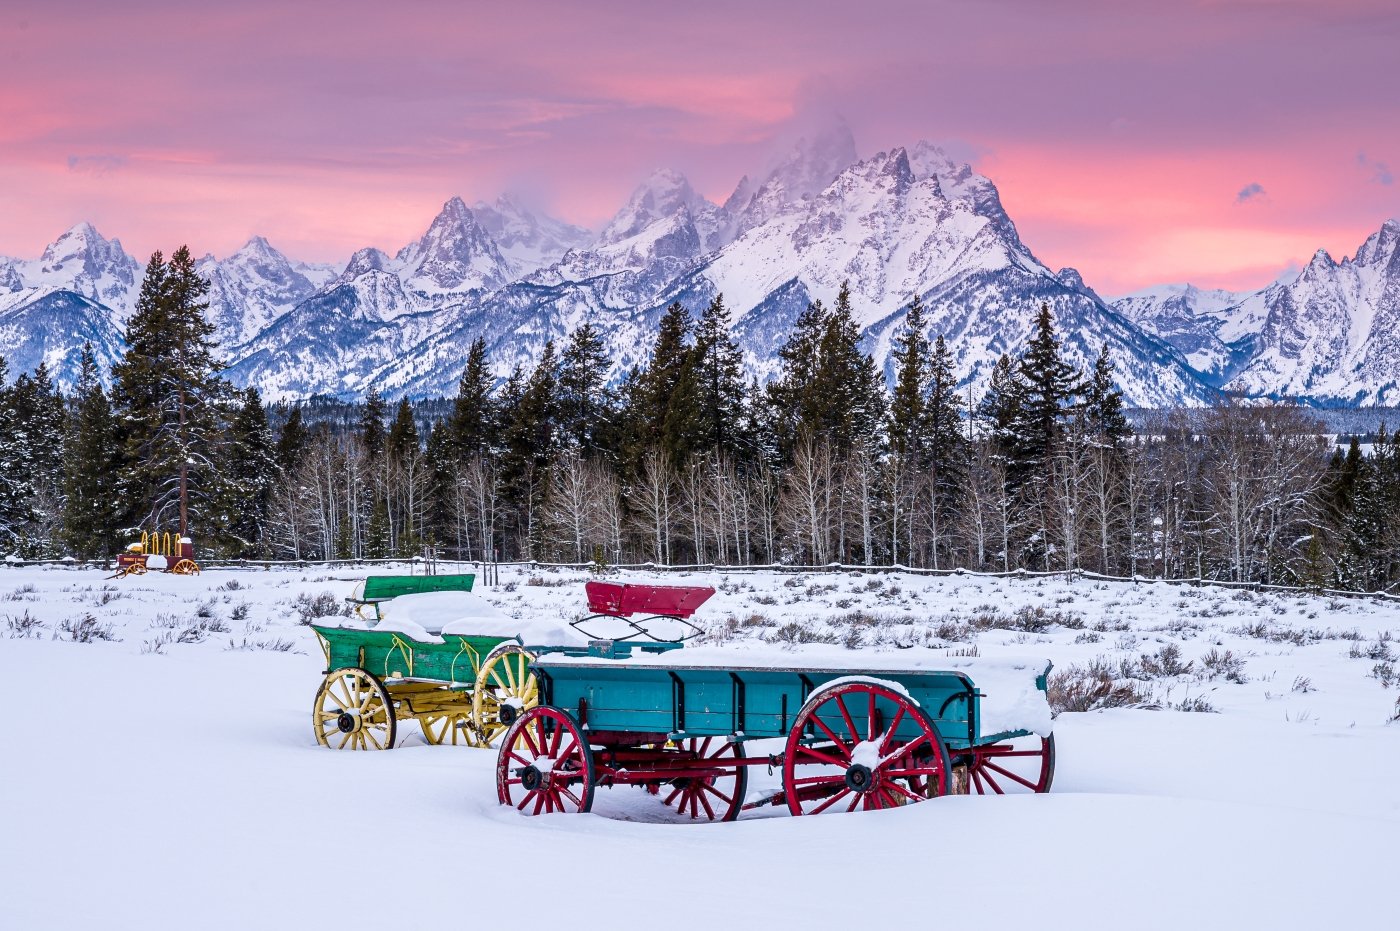 Sunrise in the Tetons,	Kris Smith, Lafayette Photographic Society,2 HM